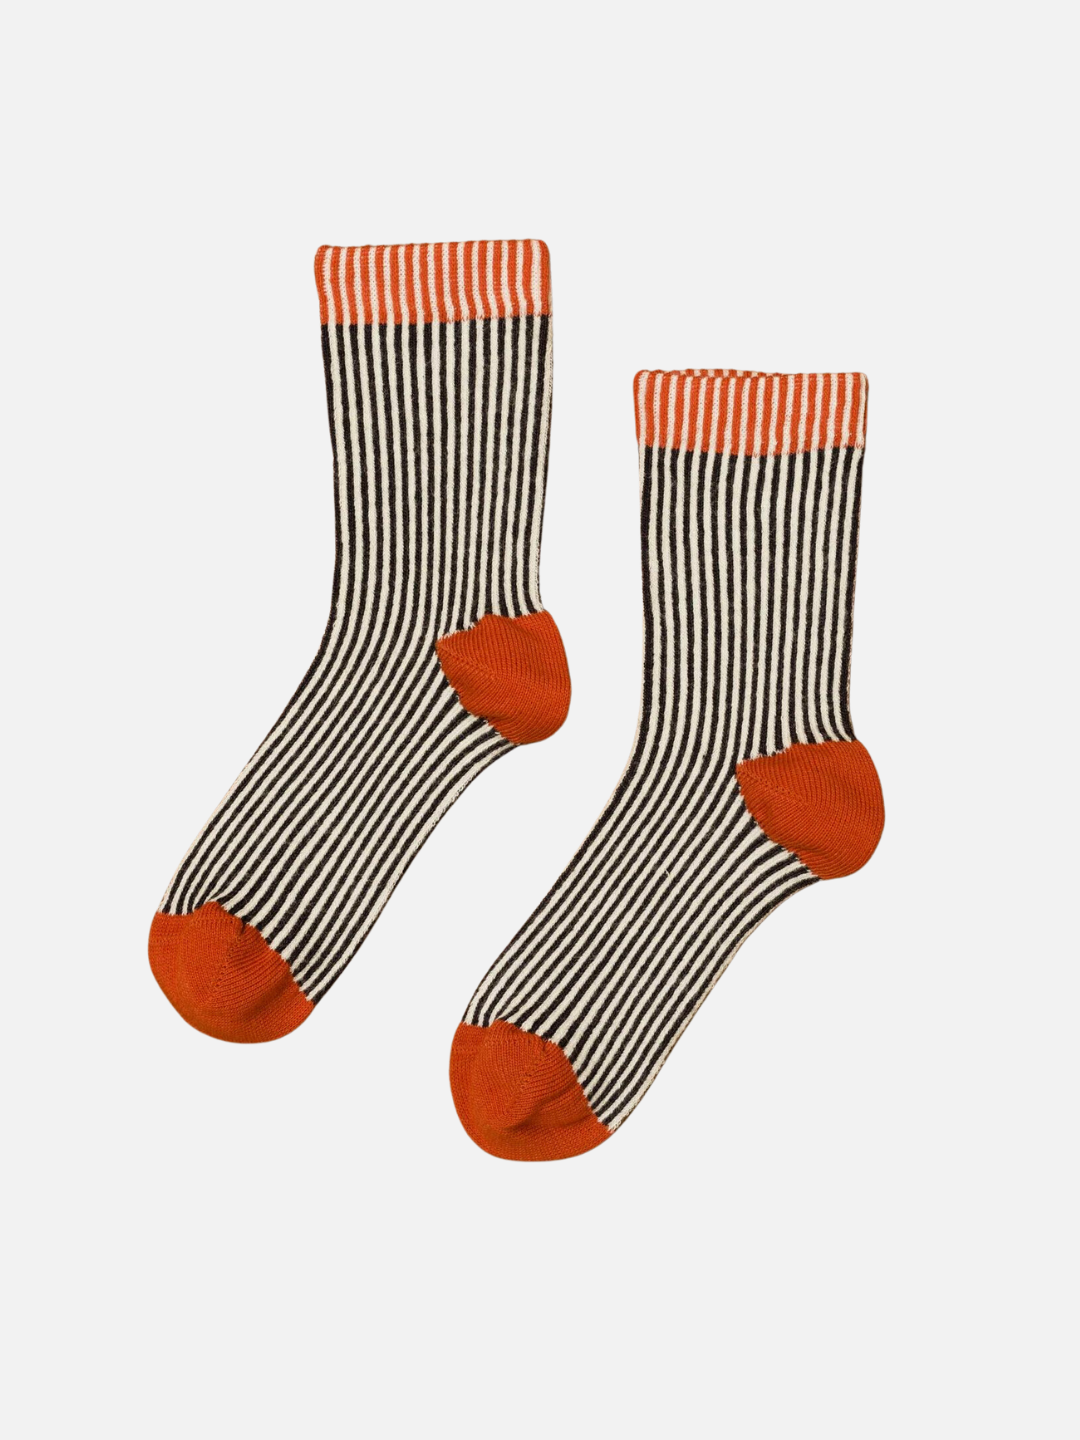 A pair of kids' ankle socks in black and cream stripes, with orange and cream tops and solid orange toes and heels